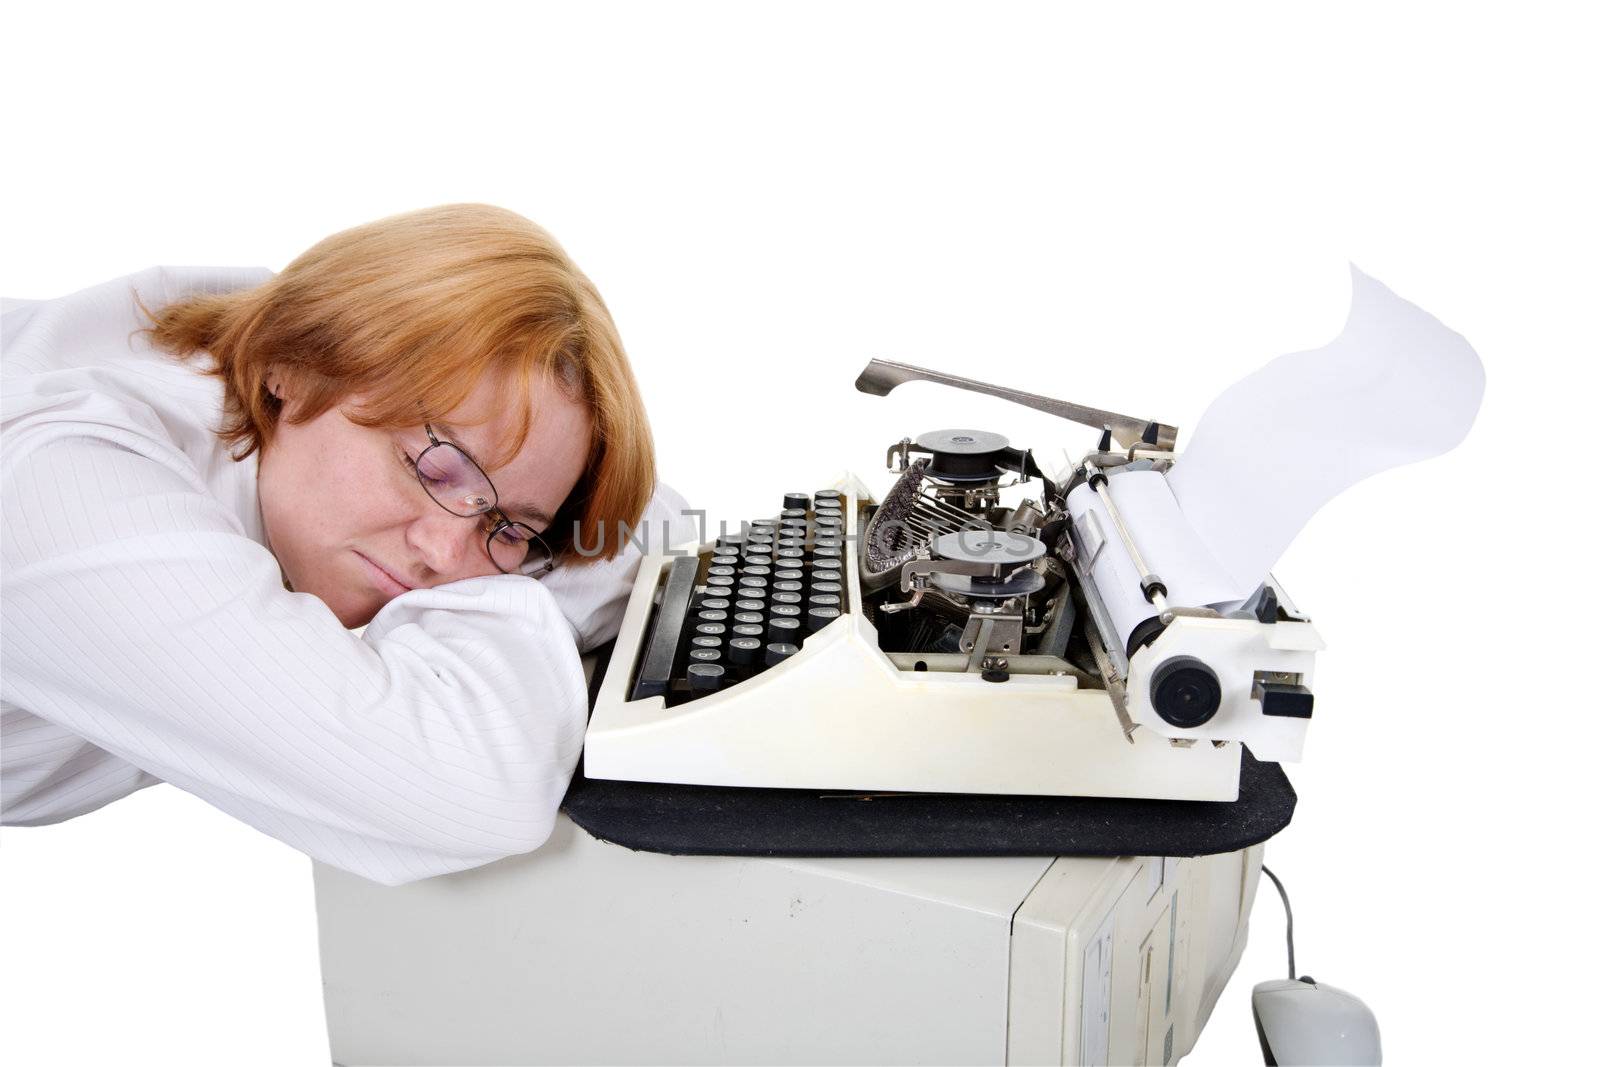 The woman sleeping on a workplace with a typewriter